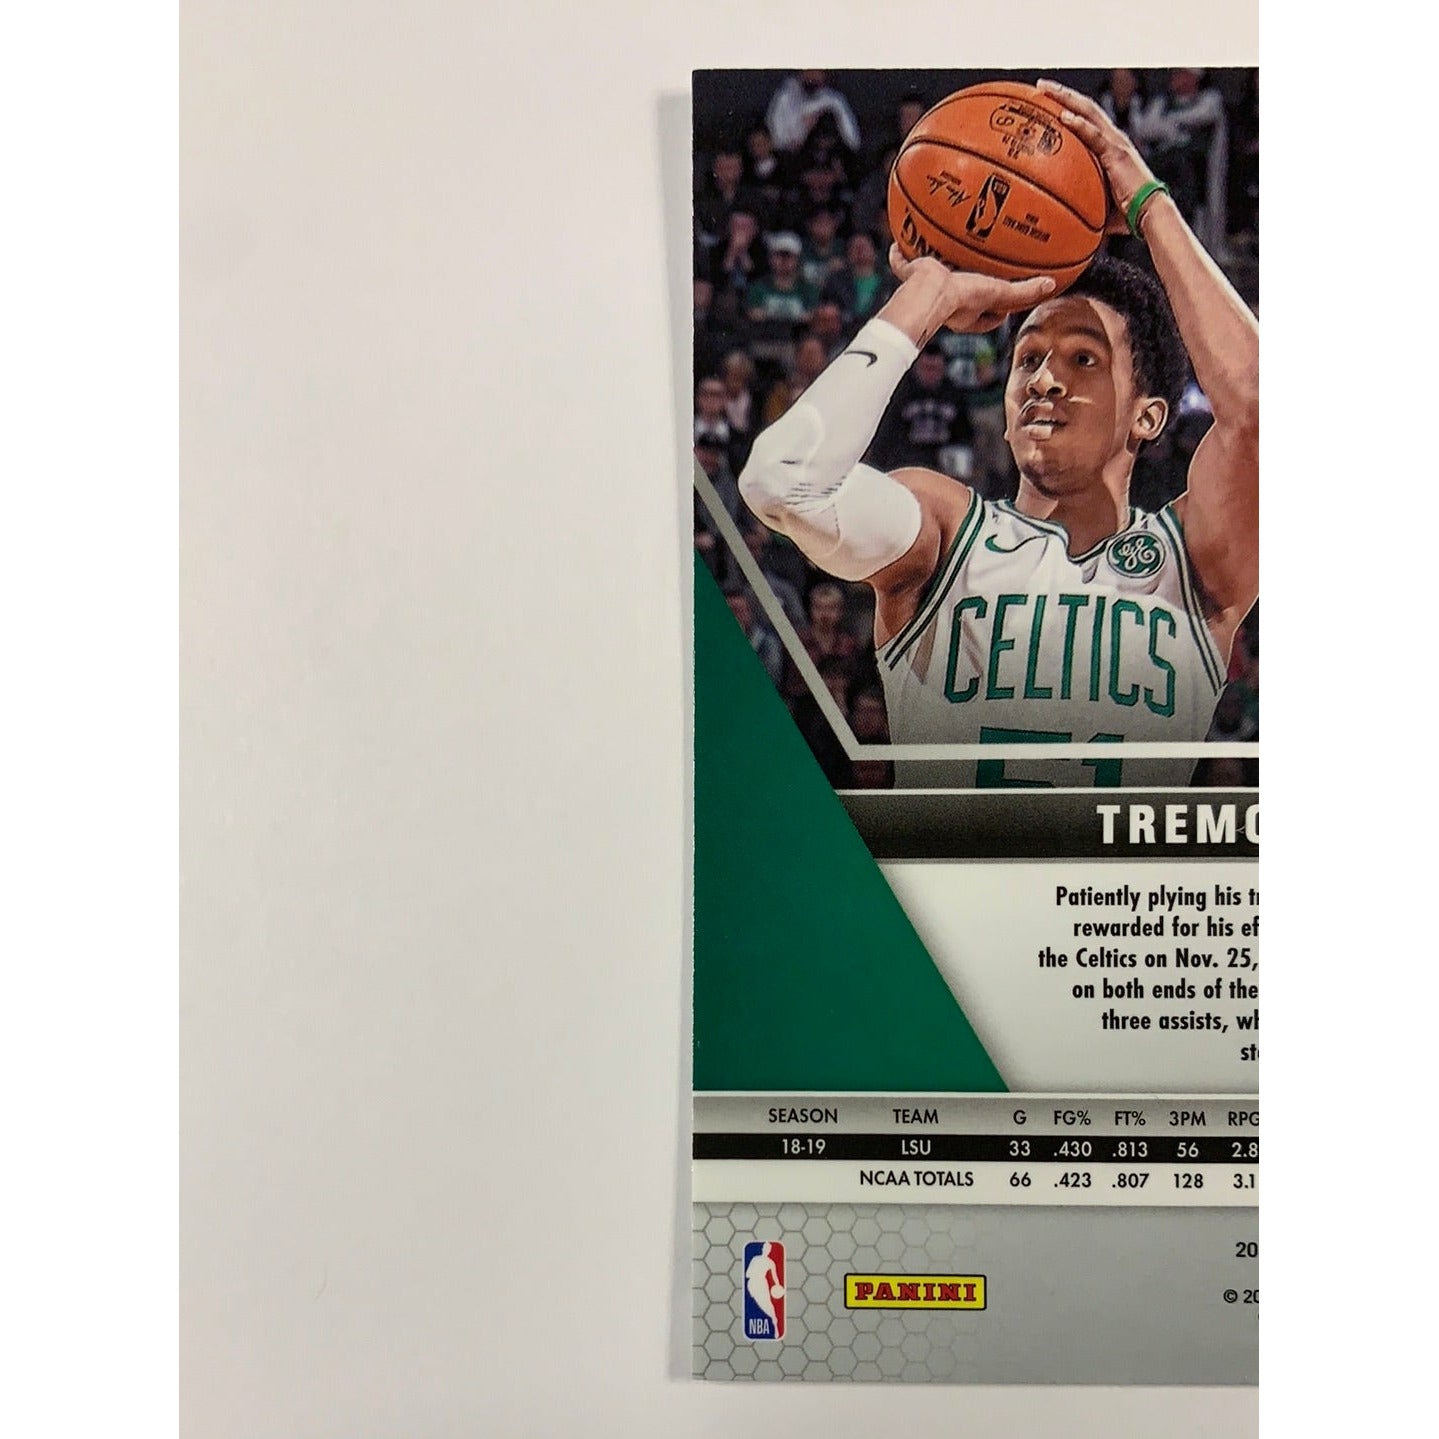 2019-20 Mosaic Tremont Waters Rookie Card